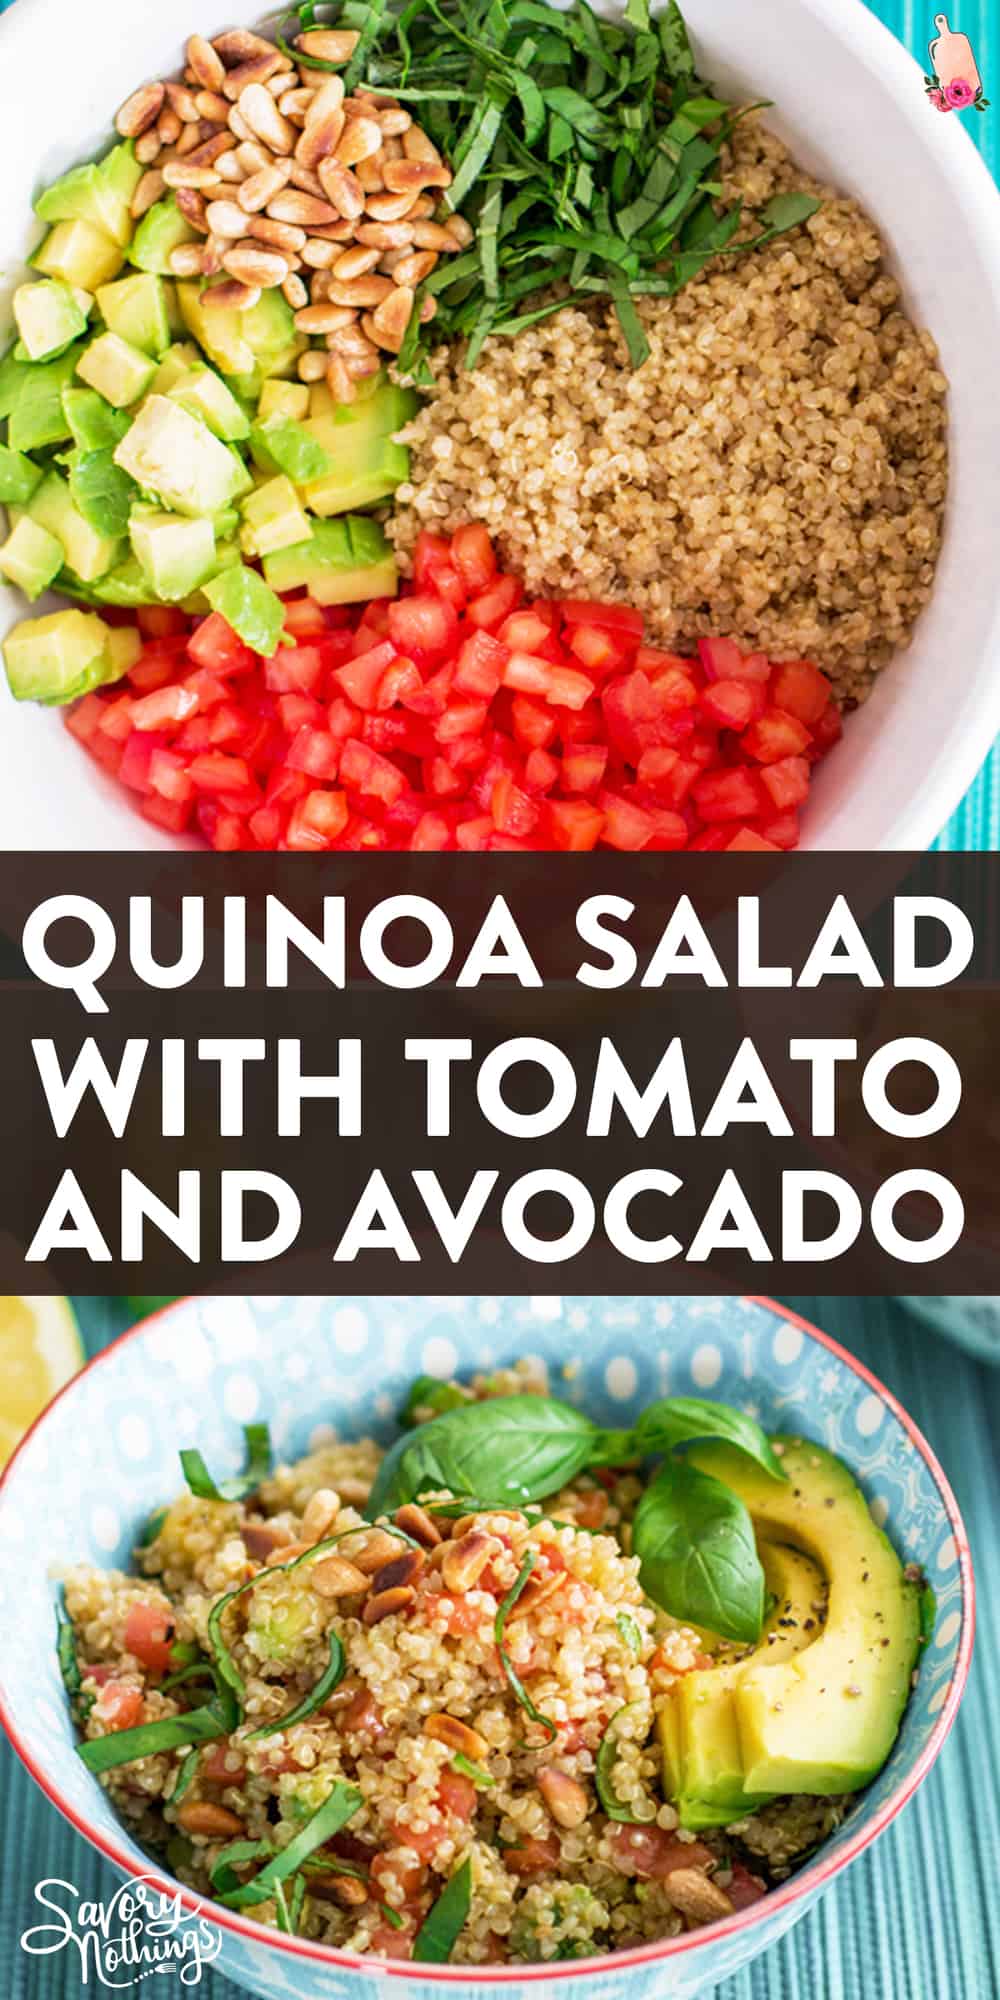 Quinoa Salad with Tomato and Avocado | Savory Nothings